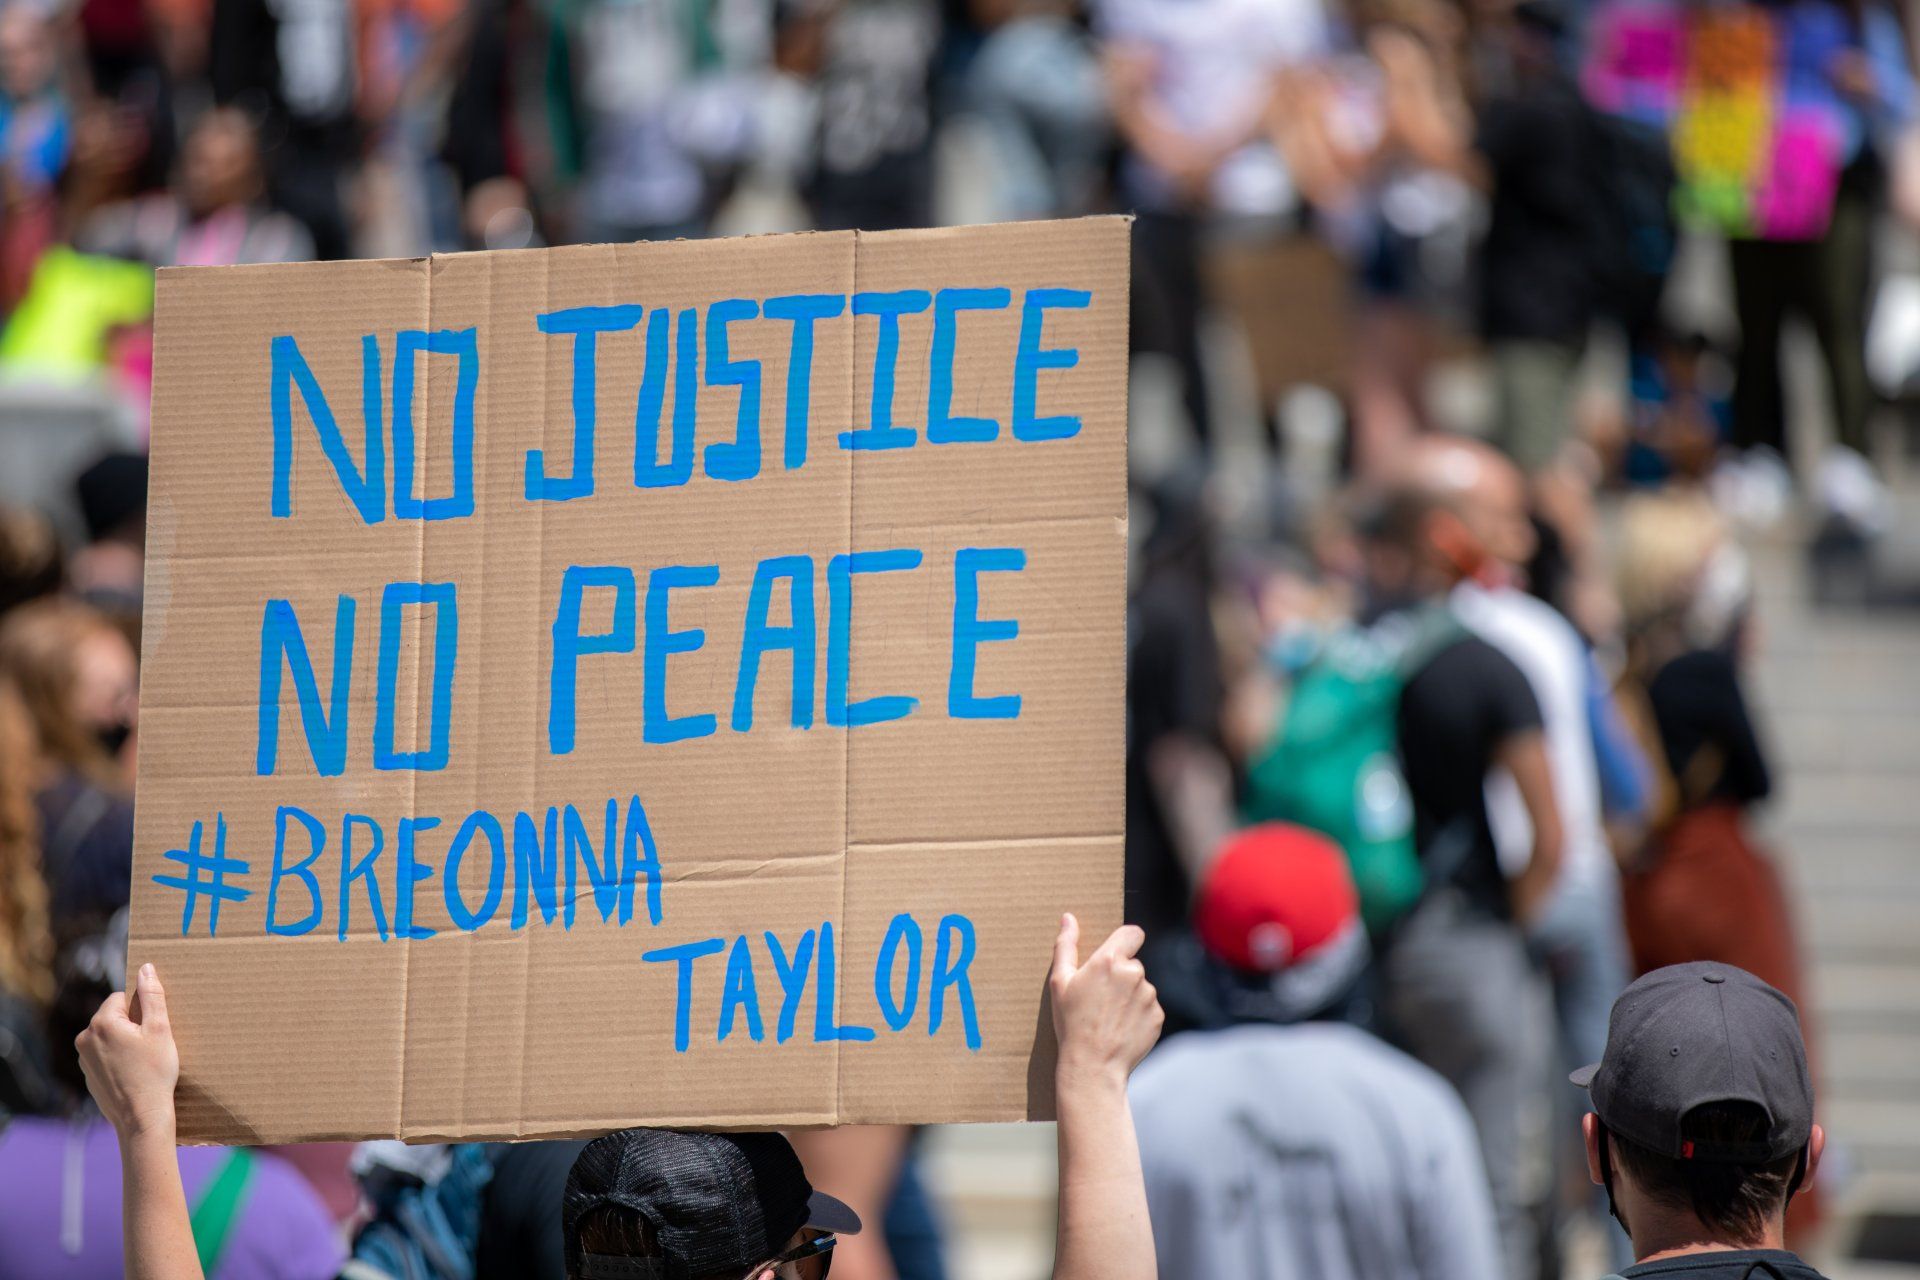 A protester holds up a cardboard sign that says "No Justice, No Peace #Breonna Taylor" in blue - Breonna Taylor's death